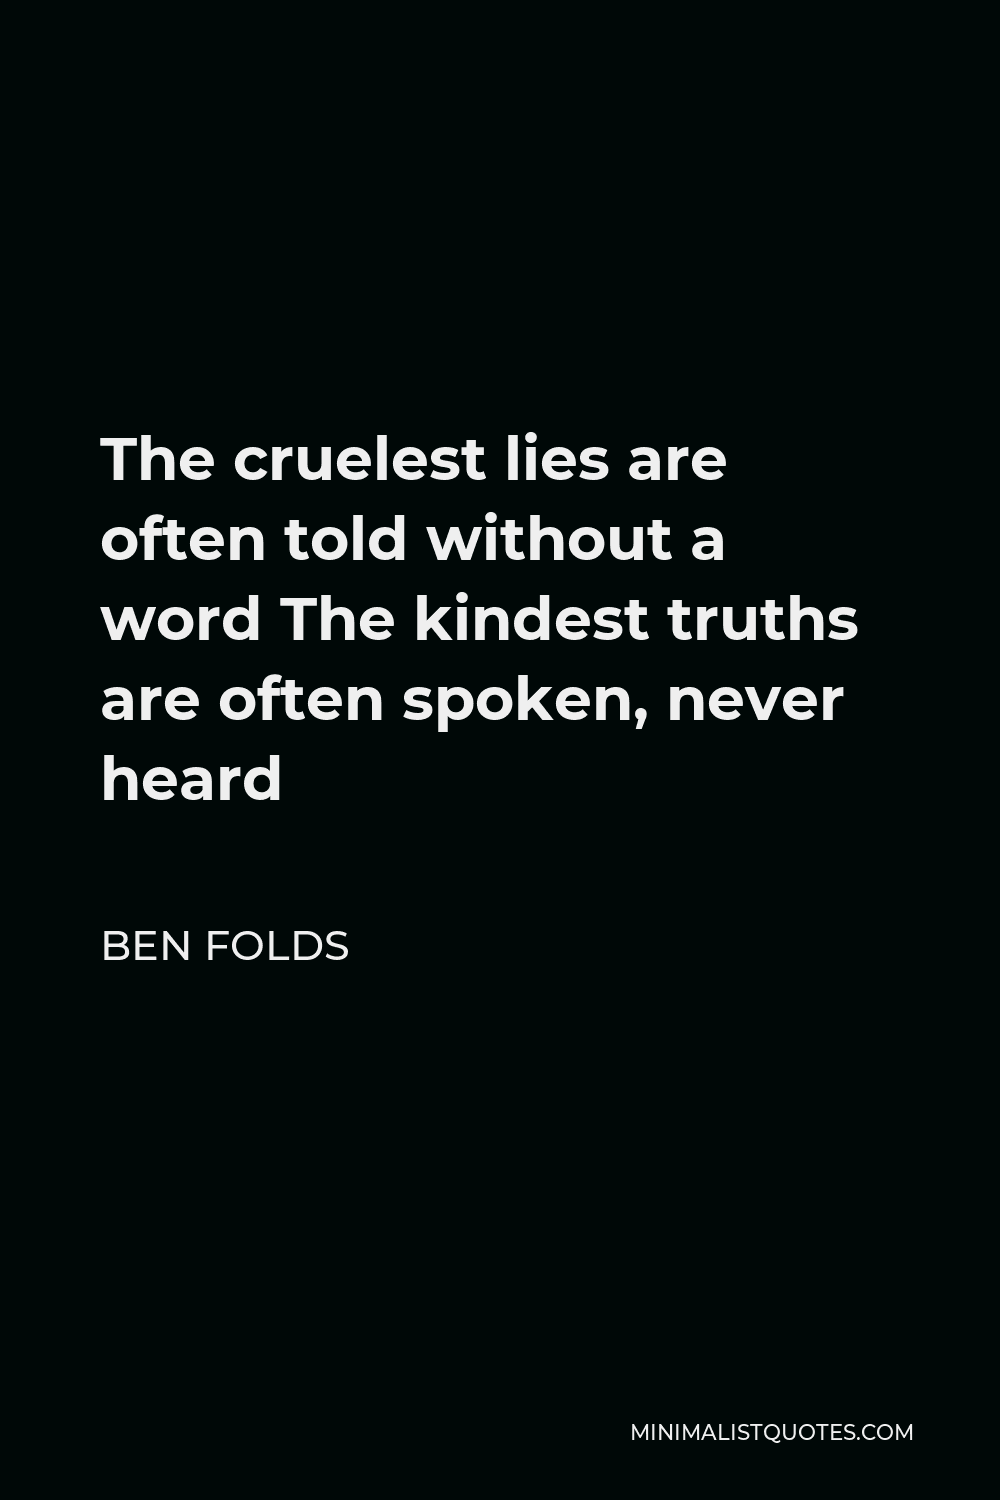 Ben Folds Quote - The cruelest lies are often told without a word The kindest truths are often spoken, never heard